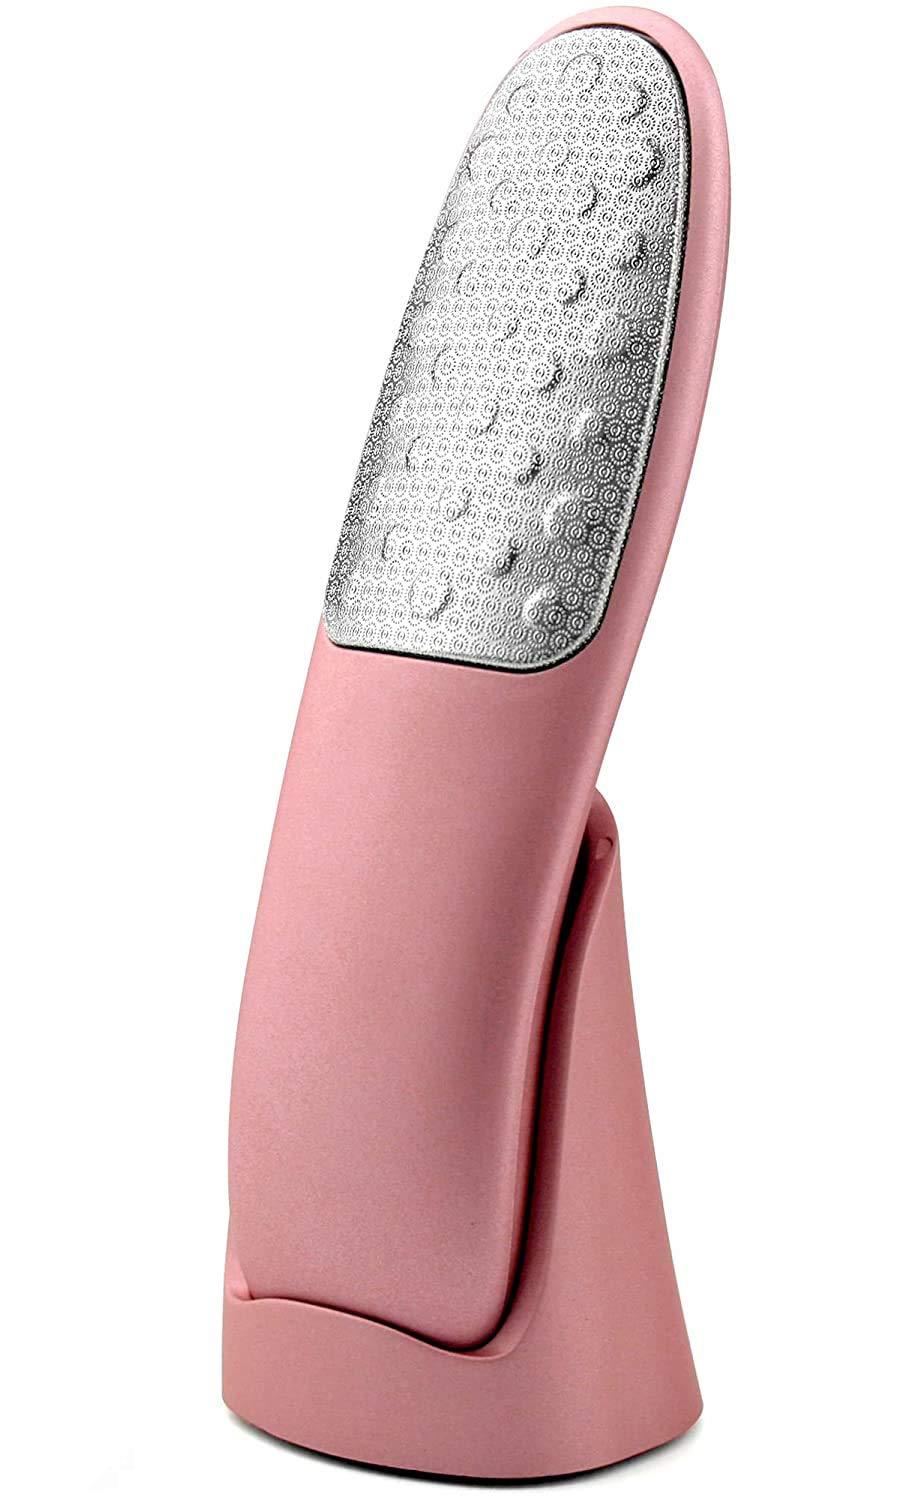 Pedicure Rasp Foot File with Holder, No-Cut Stainless Steel Foot Care with Non-Slip Handle Pedicure File to Removes Hard Skin, Can Be Used On Both Dry and Wet Feet (Foot File-Pink) Foot File-Pink - BeesActive Australia